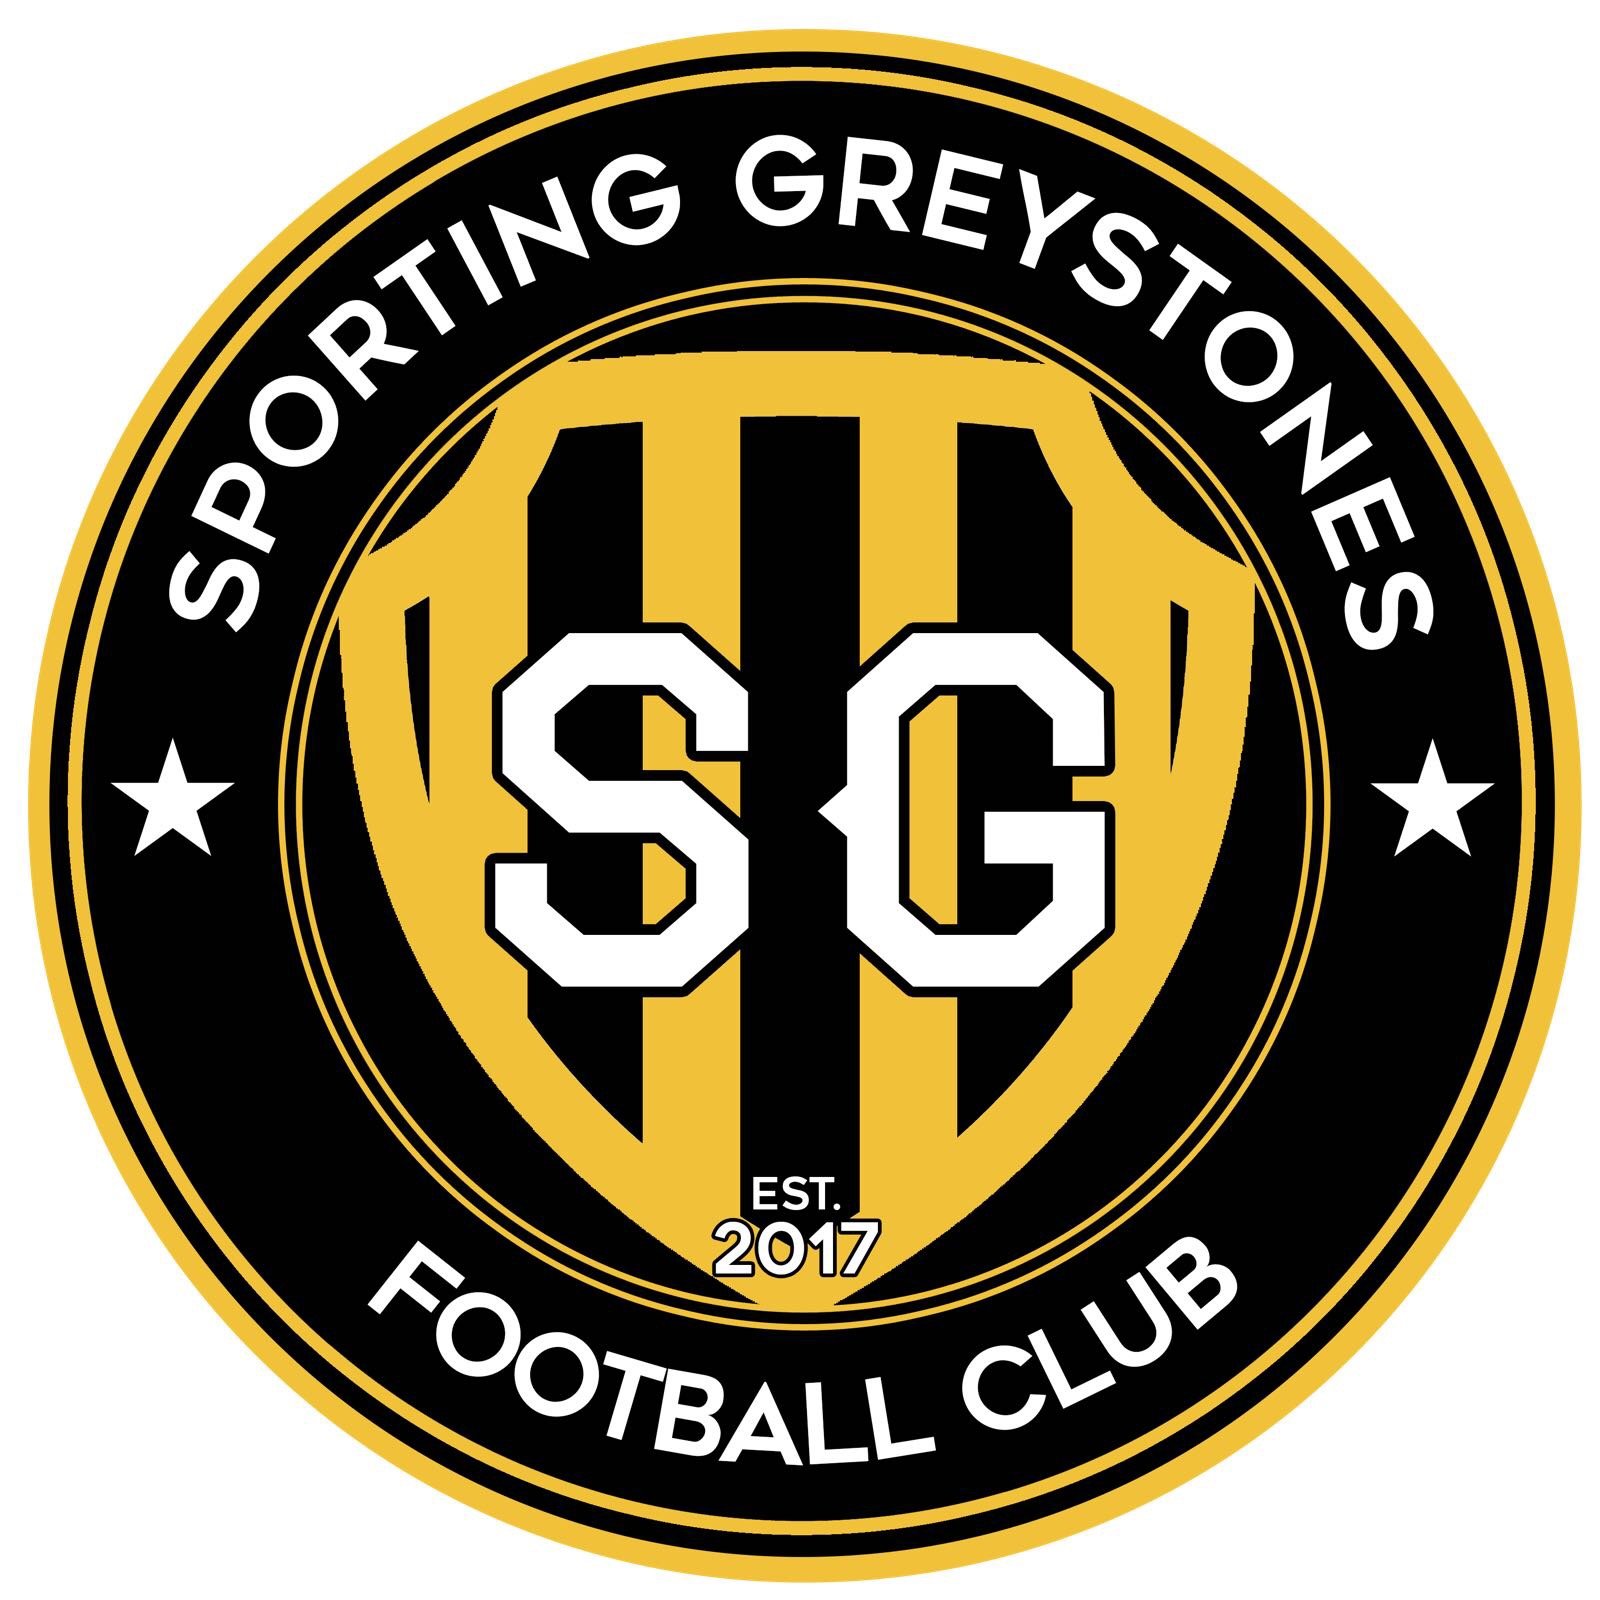 Official Twitter of Sporting Greystones FC. An exciting and rapidly growing youth football team based in Greystones, County Wicklow. ⚫️⚪️⚫️⚪️